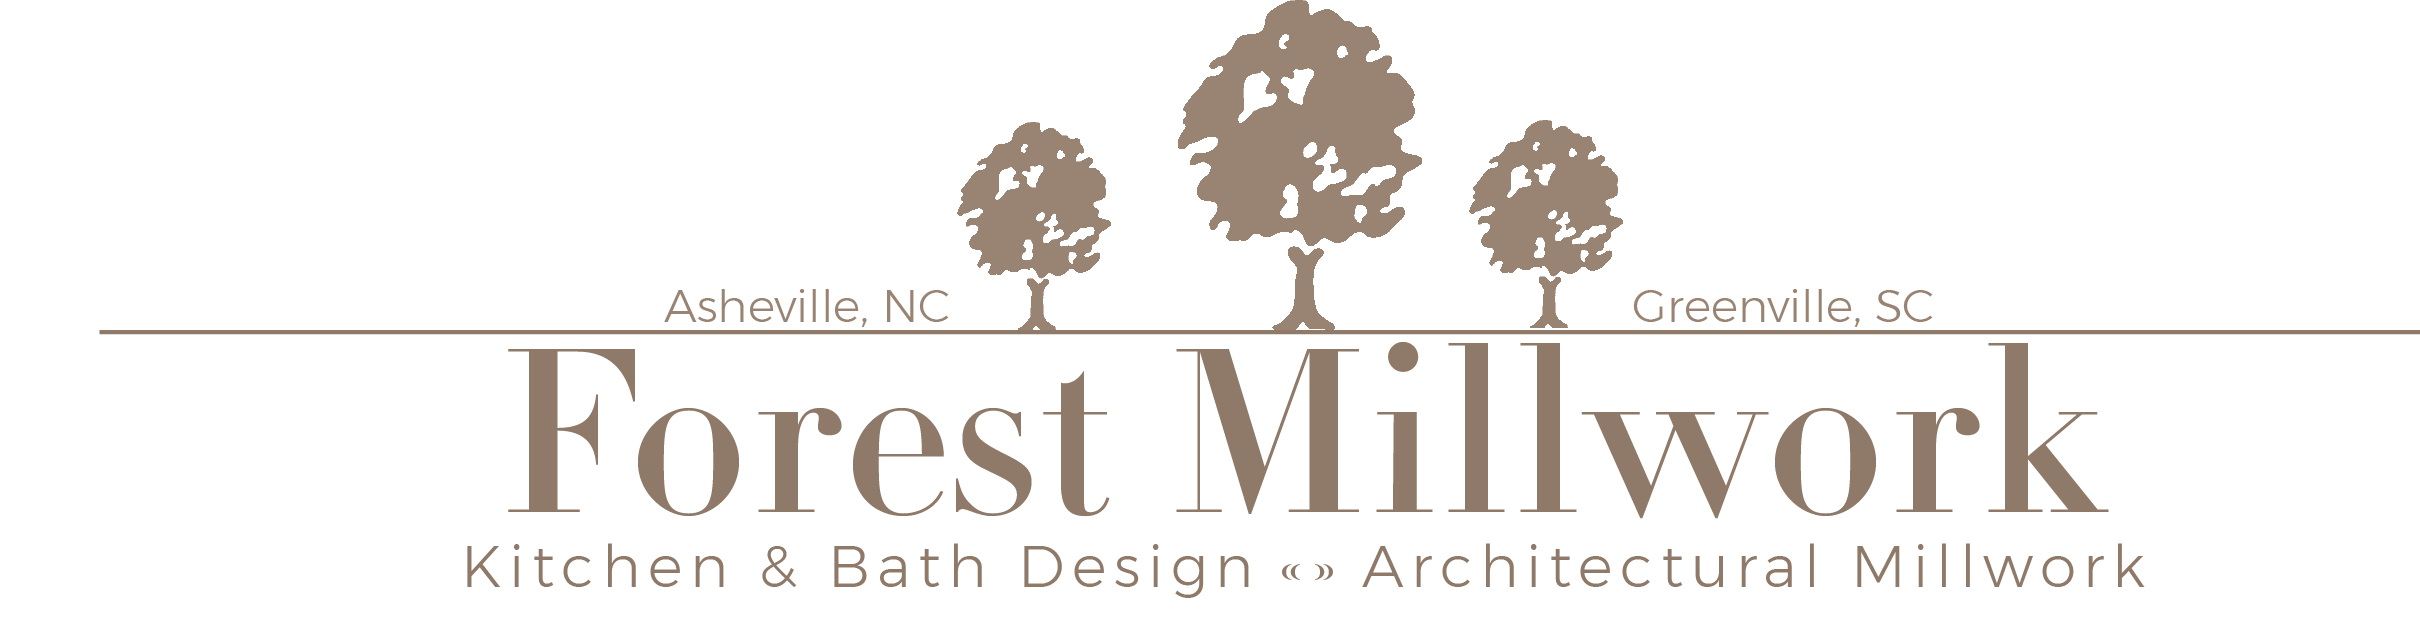 Forest Millworks